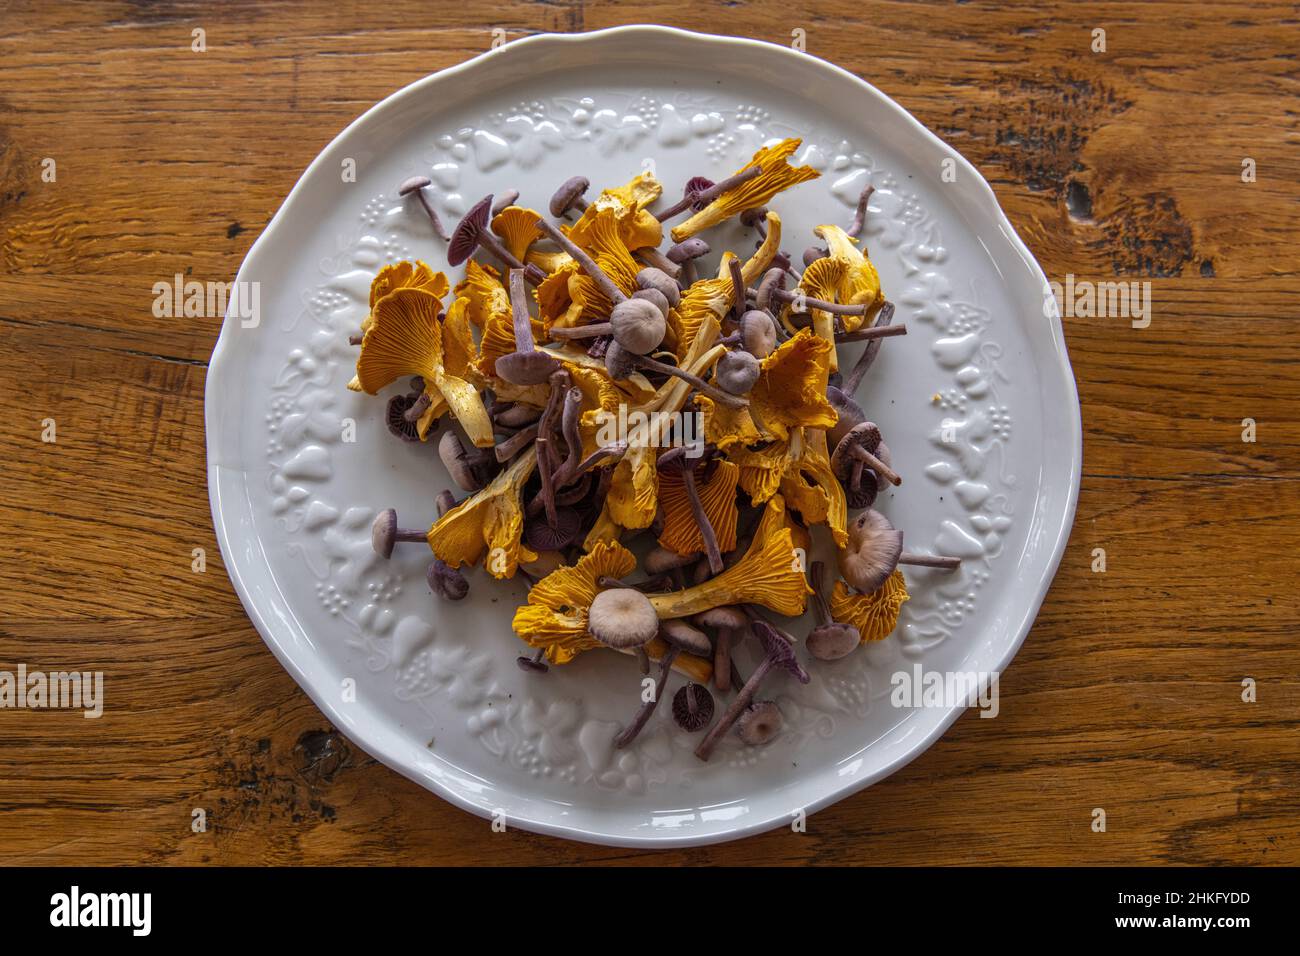 France, Somme, Crécy-en-Ponthieu, Crécy forest, Mushroom, Preparation of a mushroom omelette (Girolles and Laccaires améthystes) Stock Photo